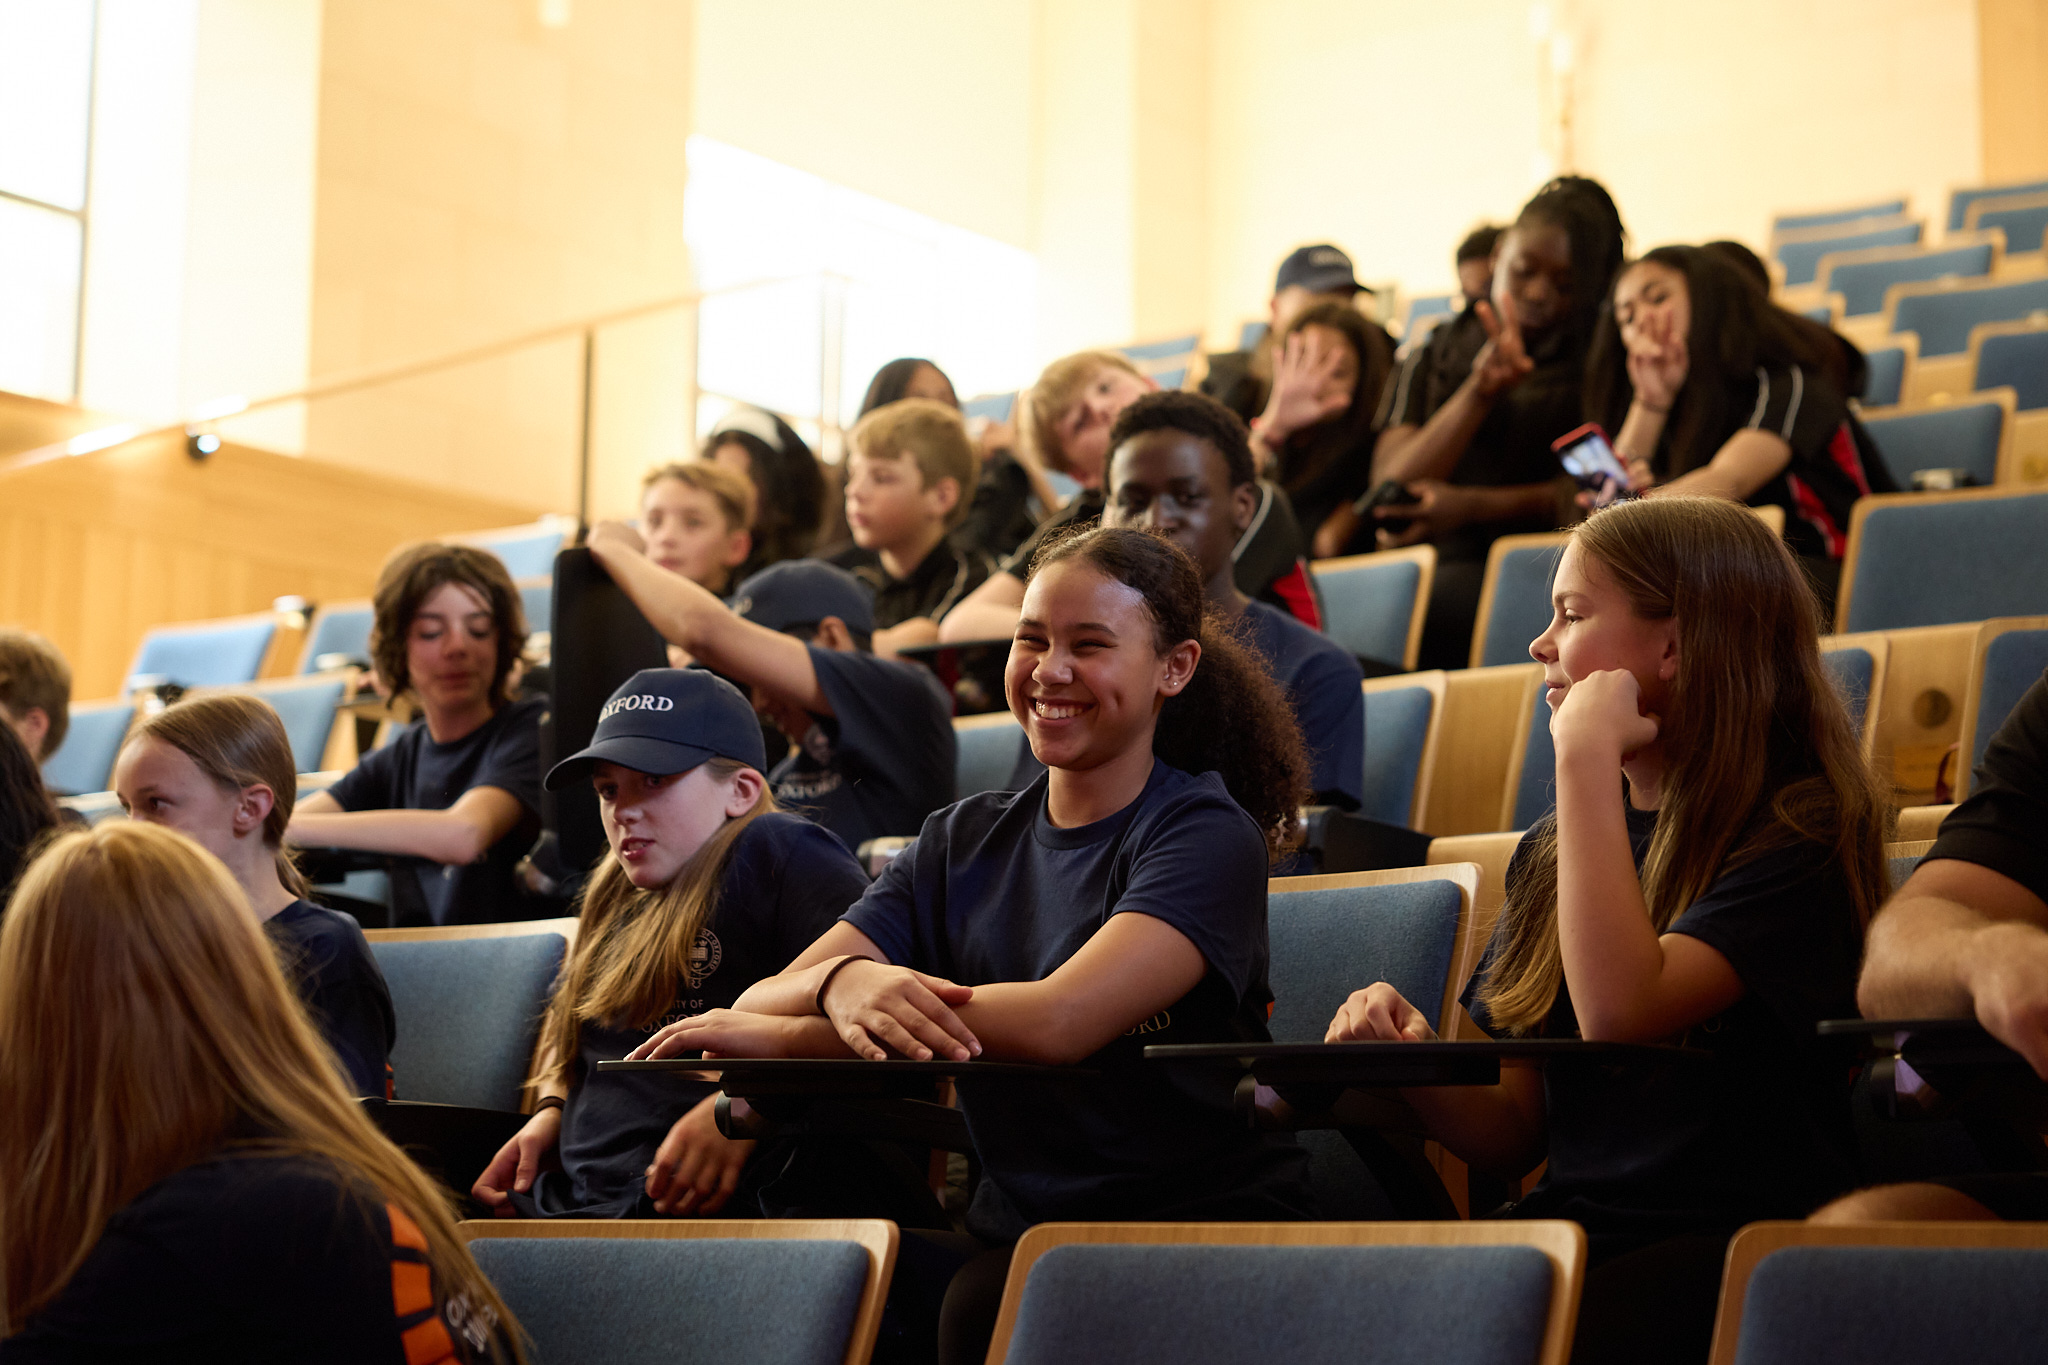 Pupils smiling seated in lecture theatre